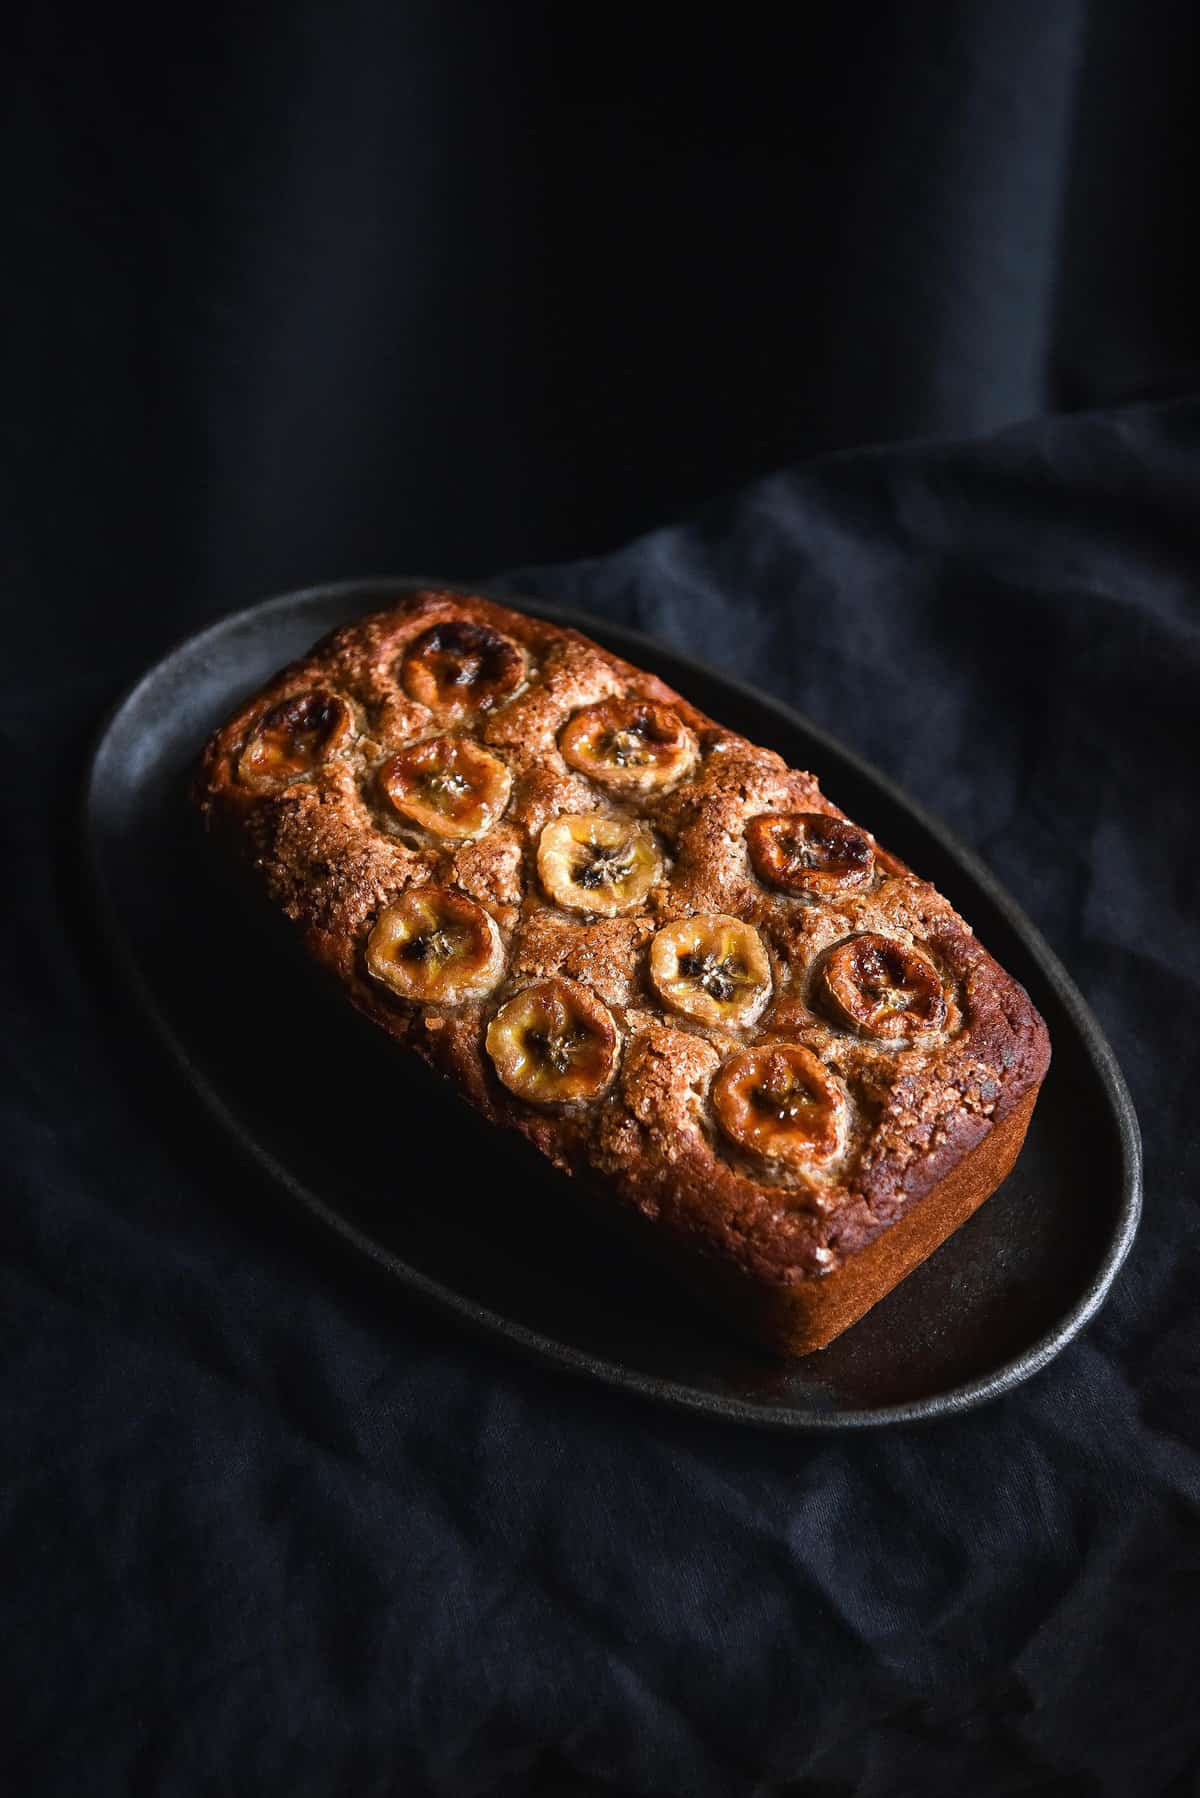 A side on moody image of a loaf of gluten free banana bread topped with banana coins. The bread sits on a steel sizzling platter on a black linen backdrop